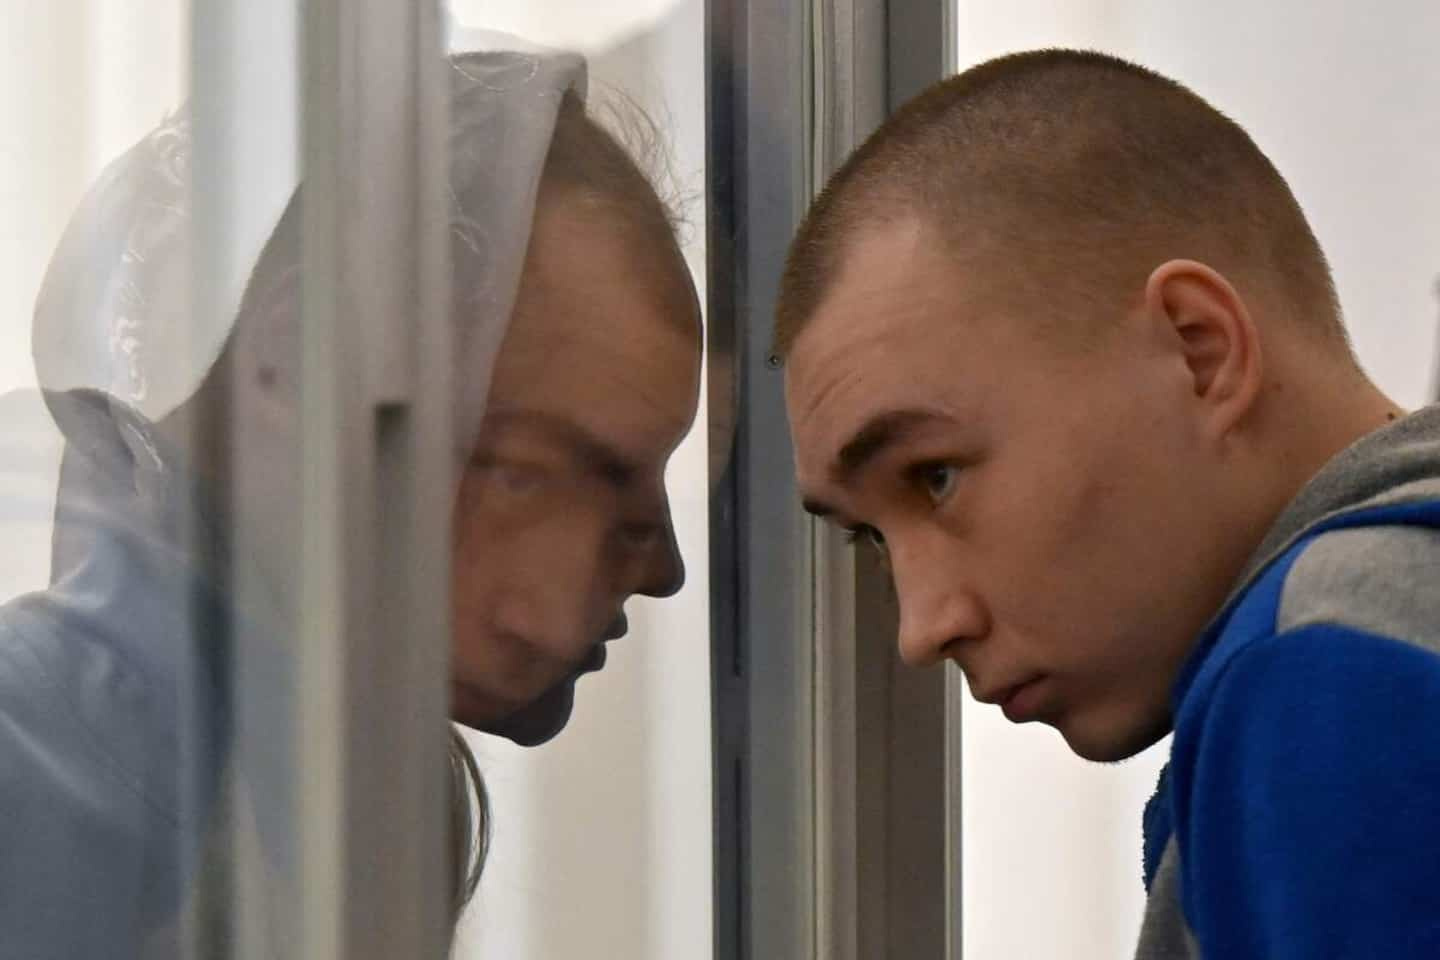 Ukraine: the life sentence of the first convicted Russian soldier reduced to 15 years in prison